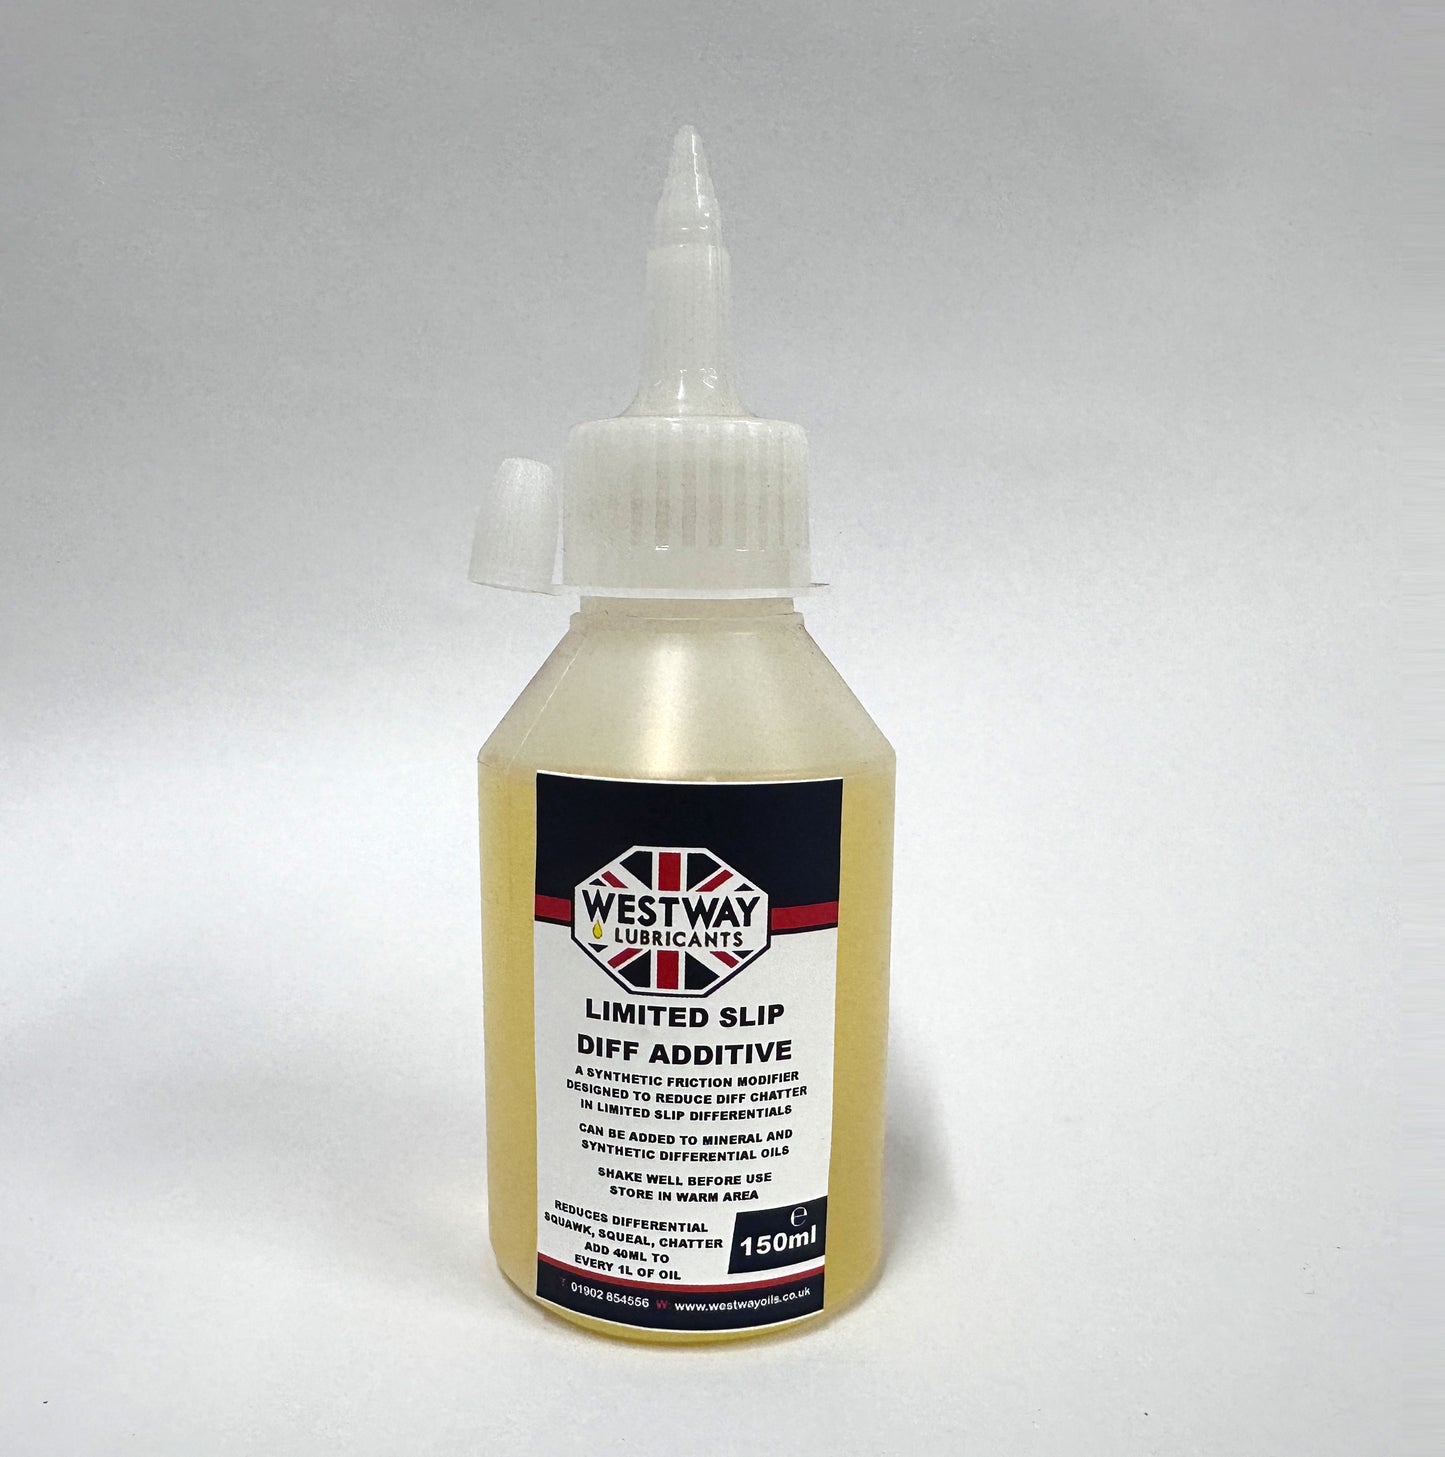 Friction Modifier LSD Additive Diff Additive for LSD Diffs